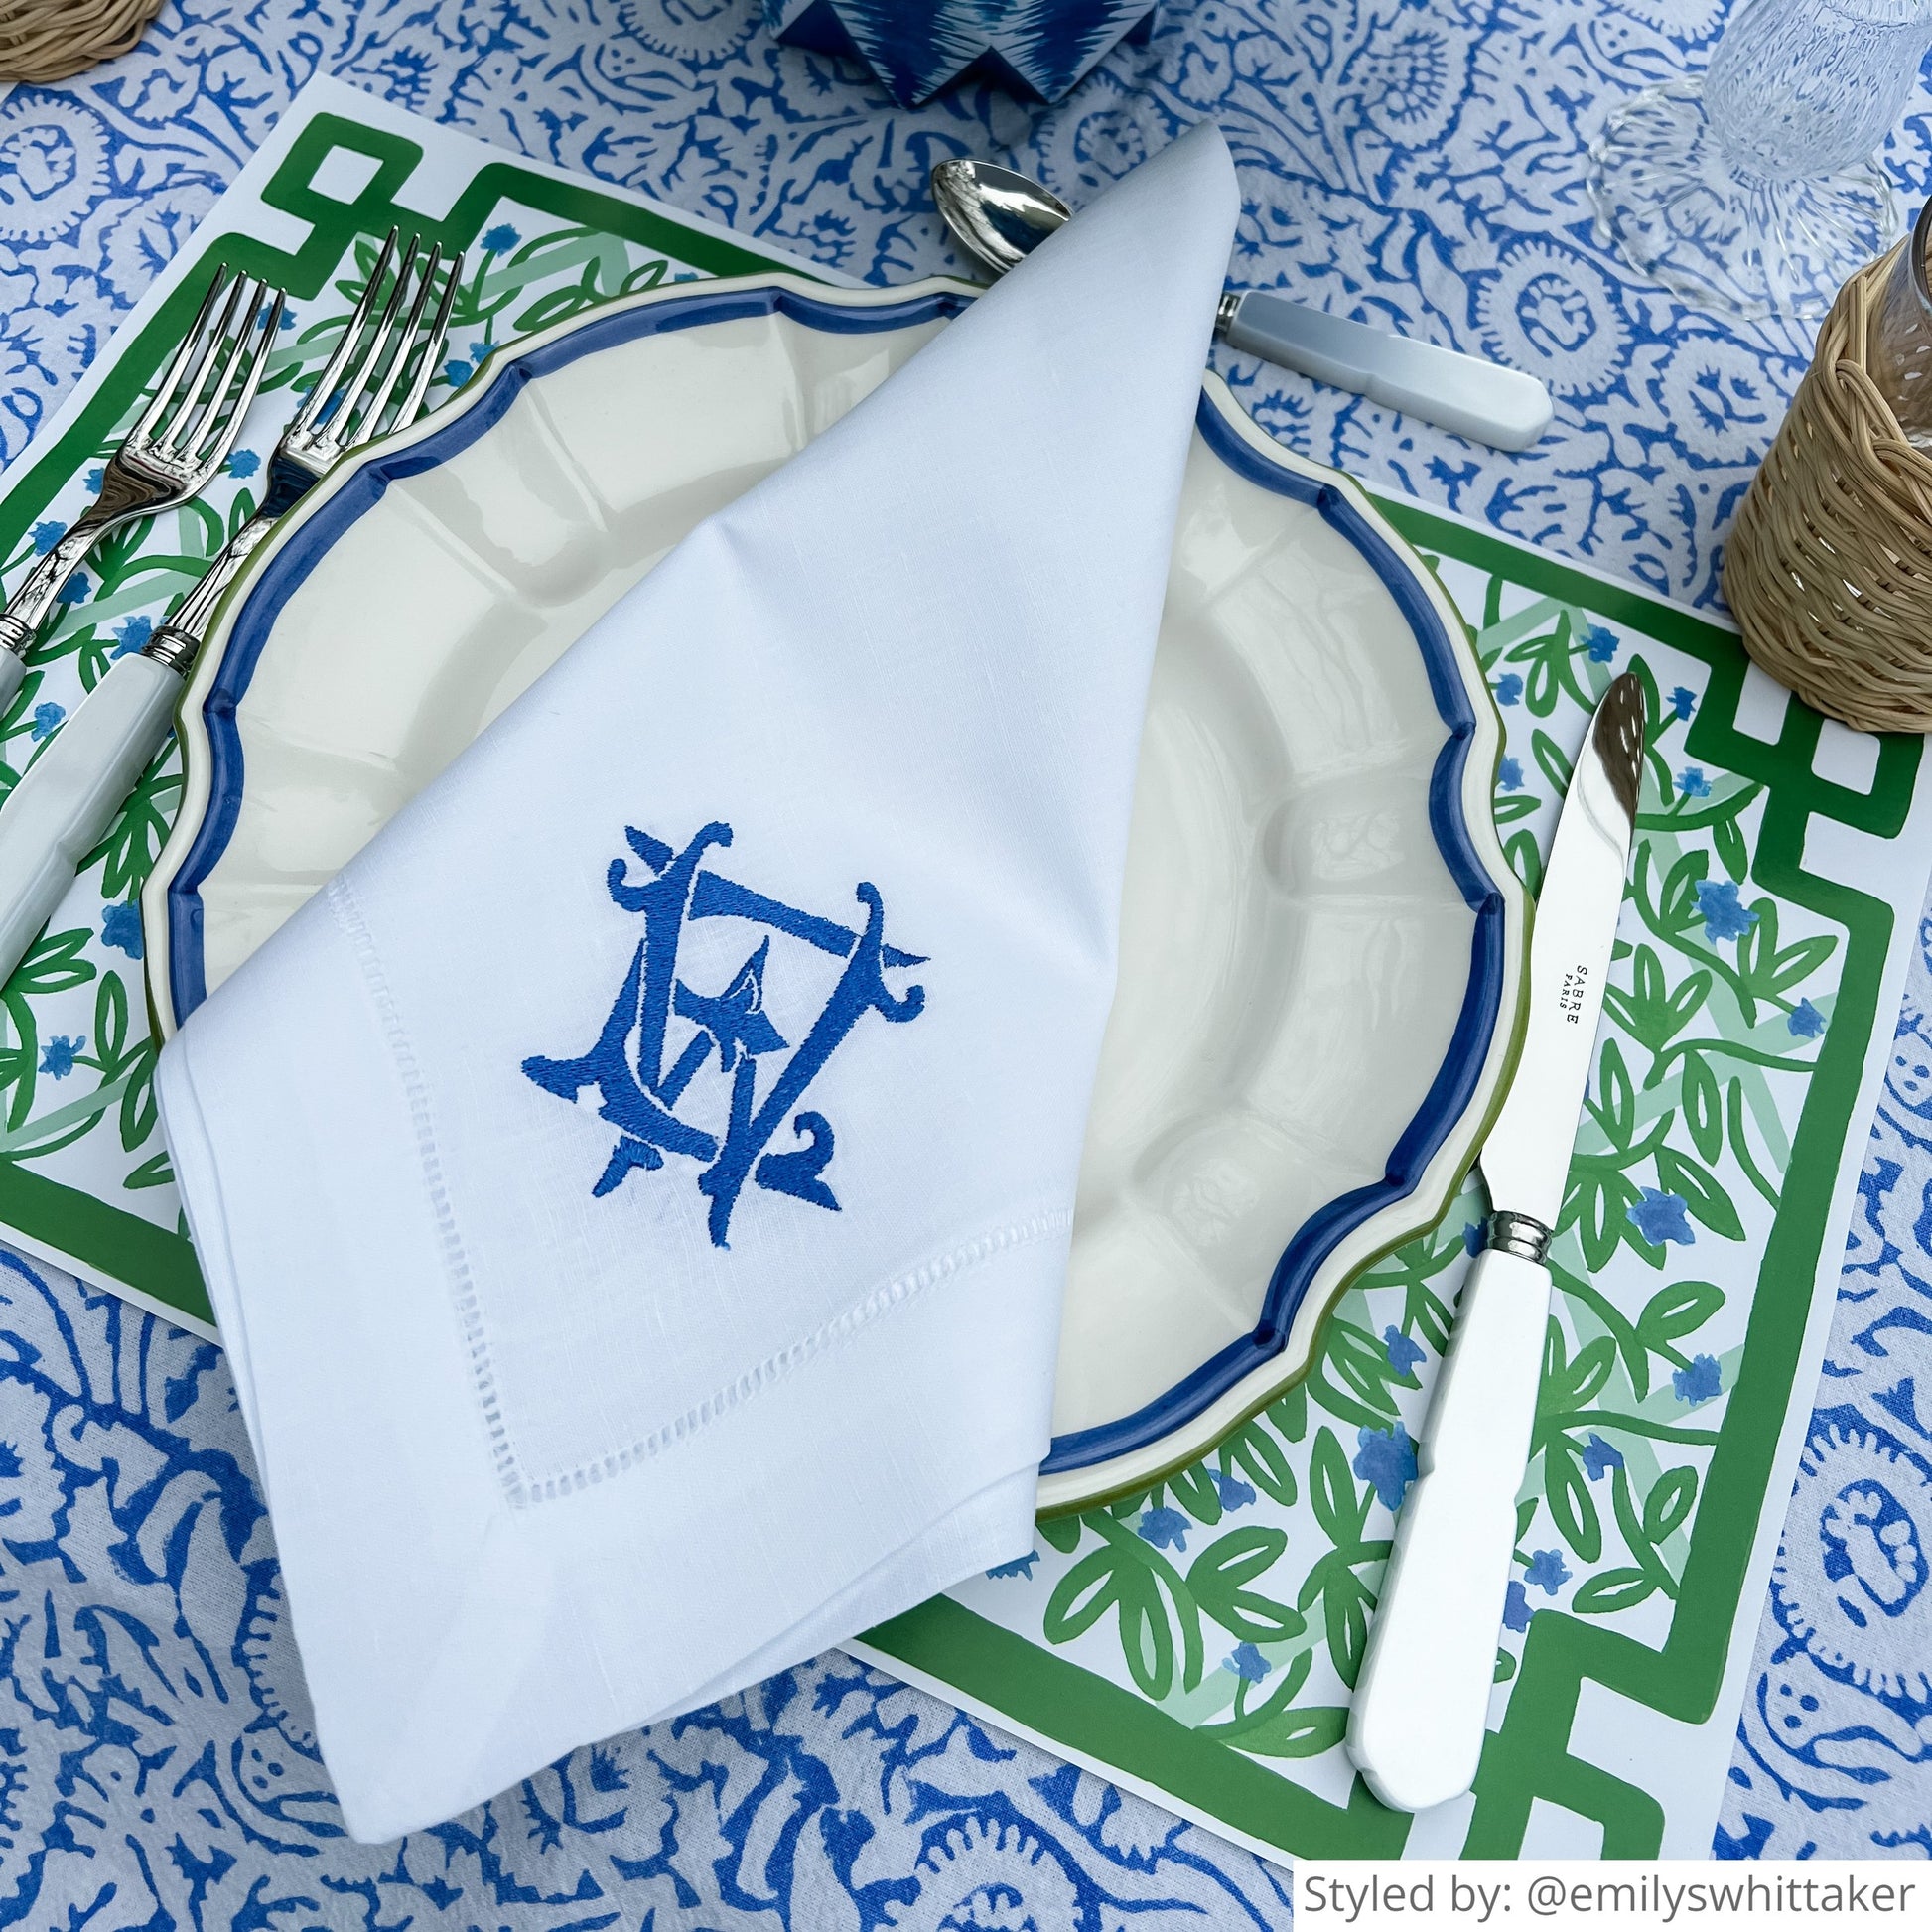 Place setting with a green and white paper placemat layered with a blue and white plate and blue and white napkin on a blue and white floral tablecloth